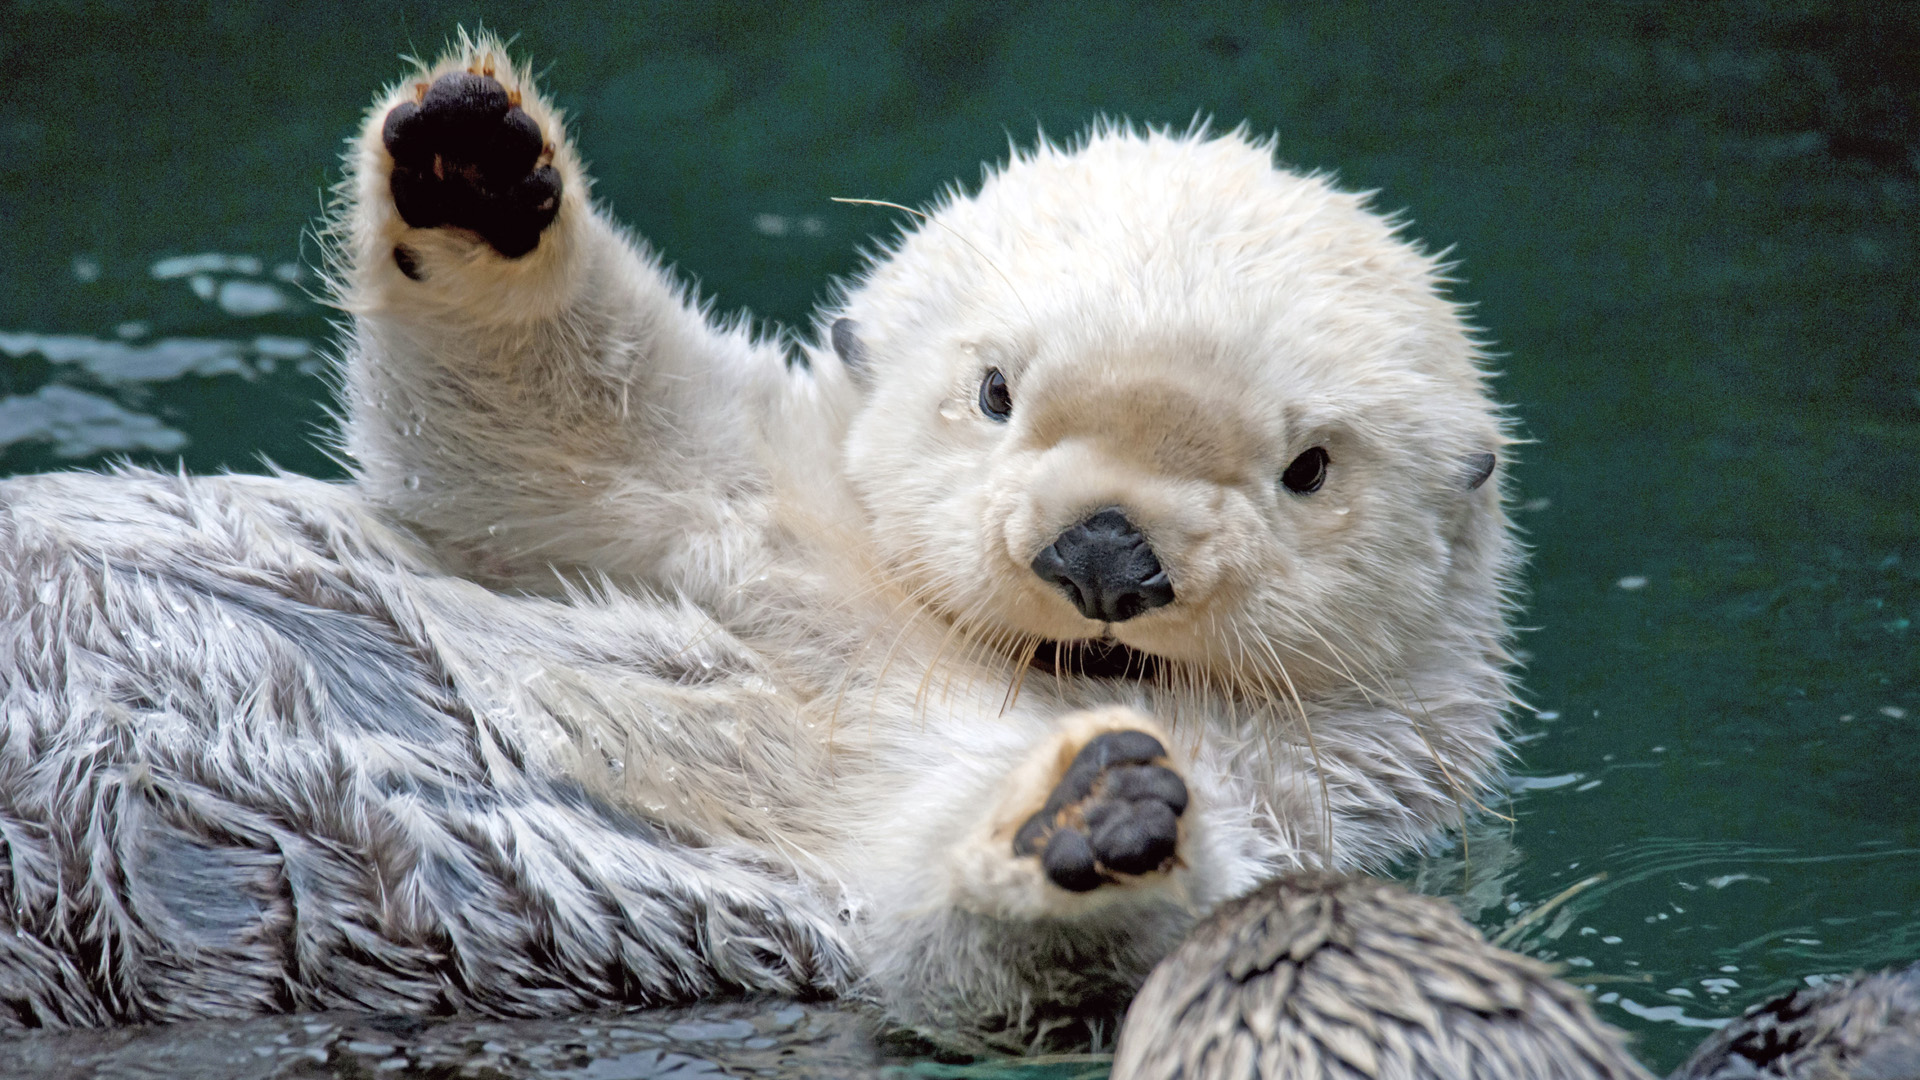 He's obviously telling a fishing story (which is otterly, preposterously over exaggerated, as all fishing stories are)